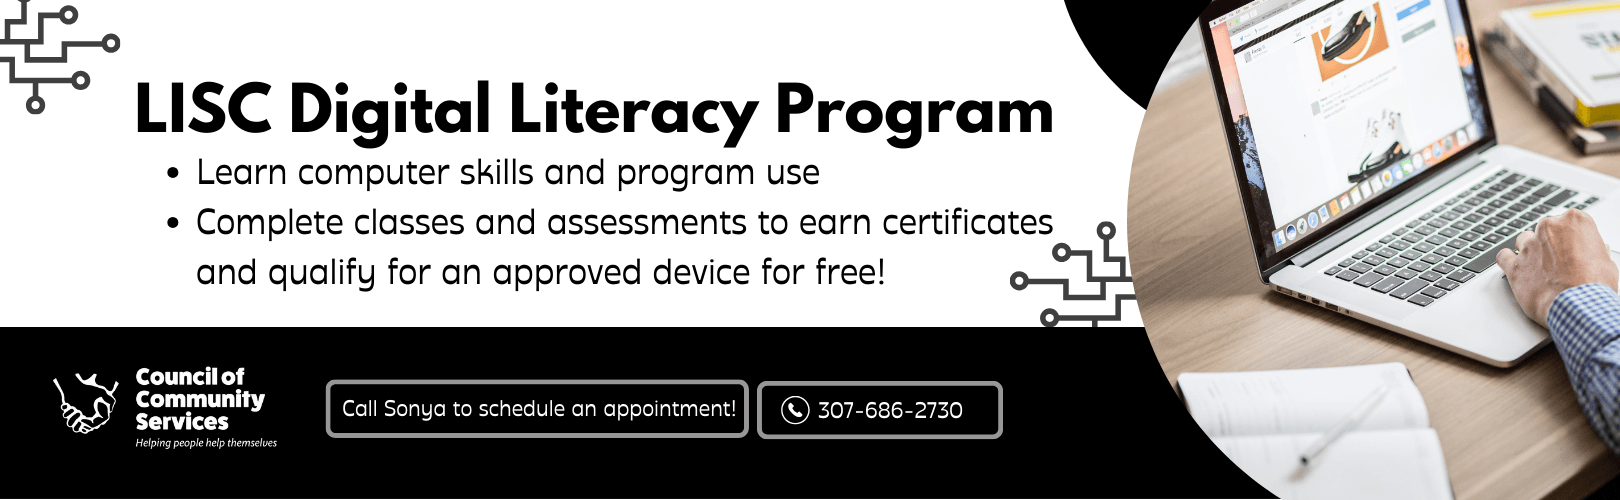 Digital Literacy Program for those seeking computer skills and devices!